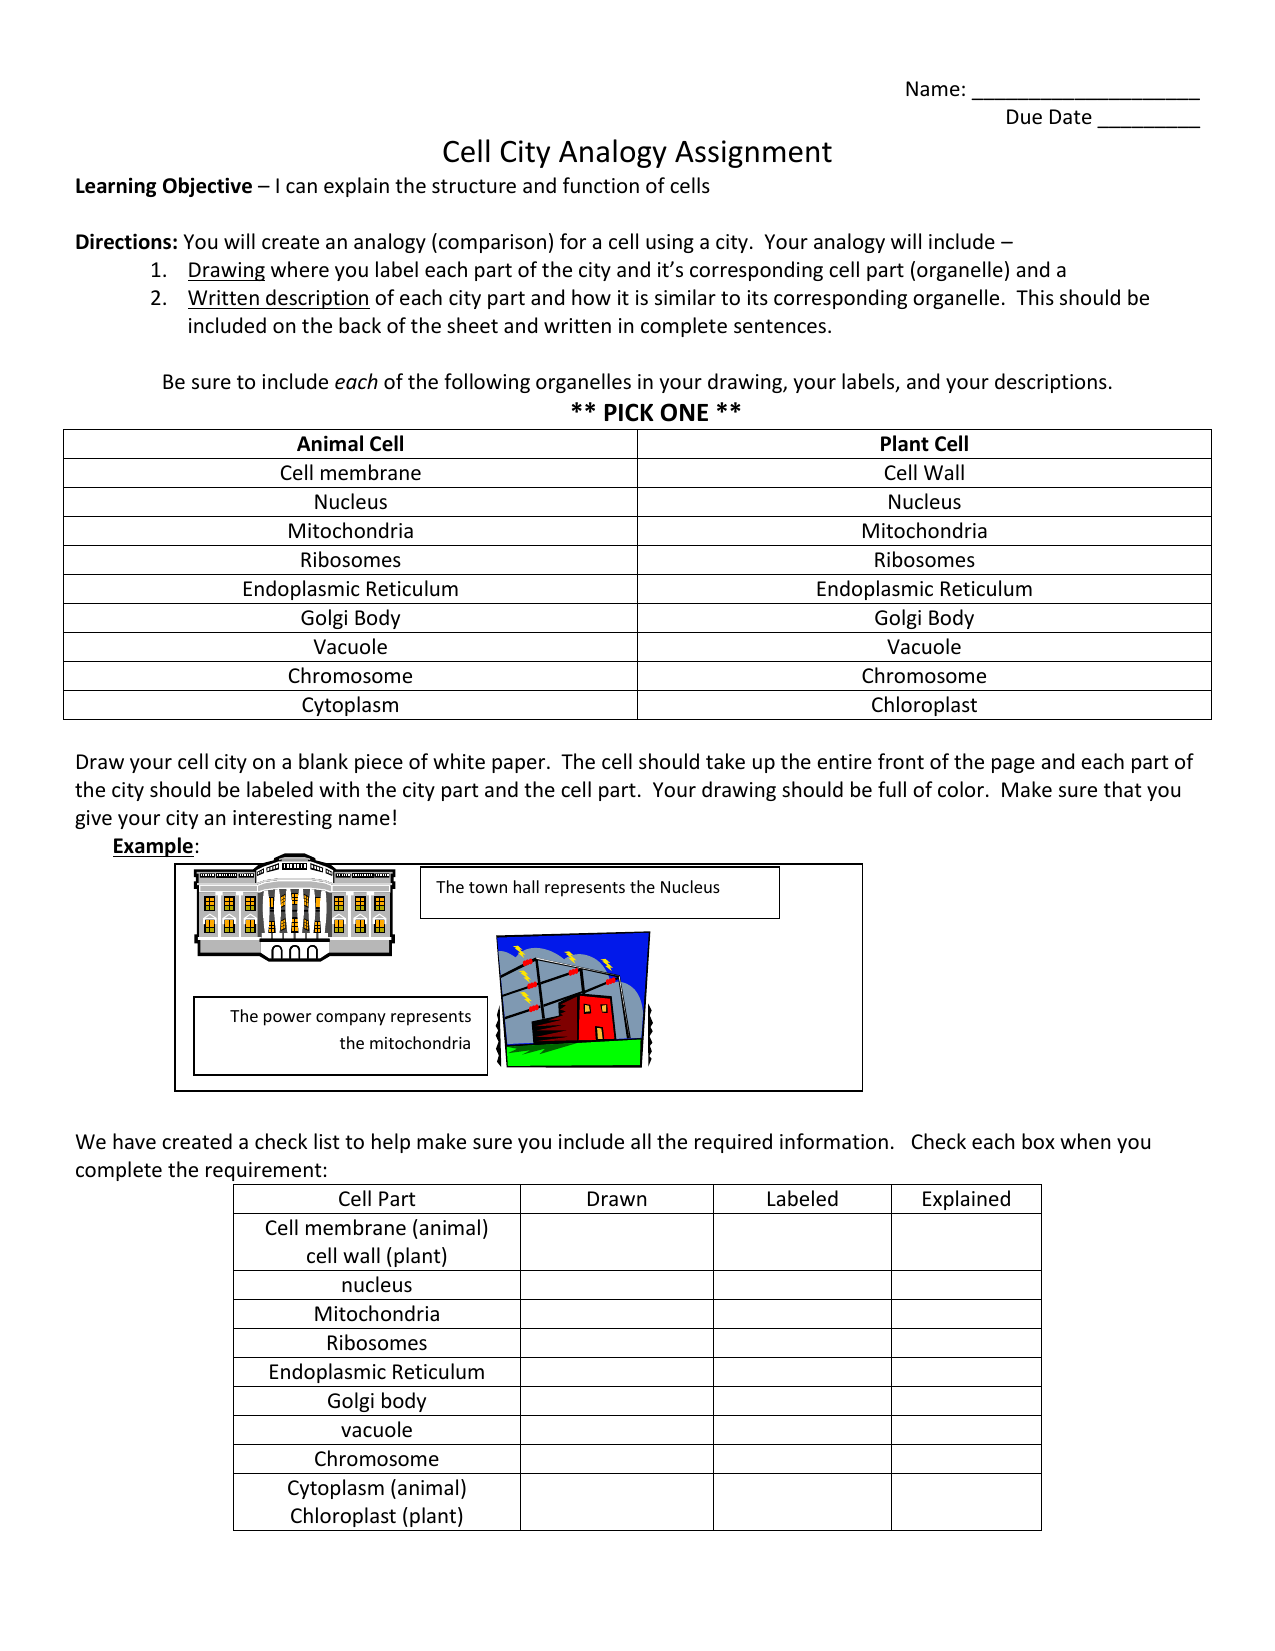 23 Read Answer Color Label Mitochondria - Label Design Ideas 23 In Cell City Analogy Worksheet